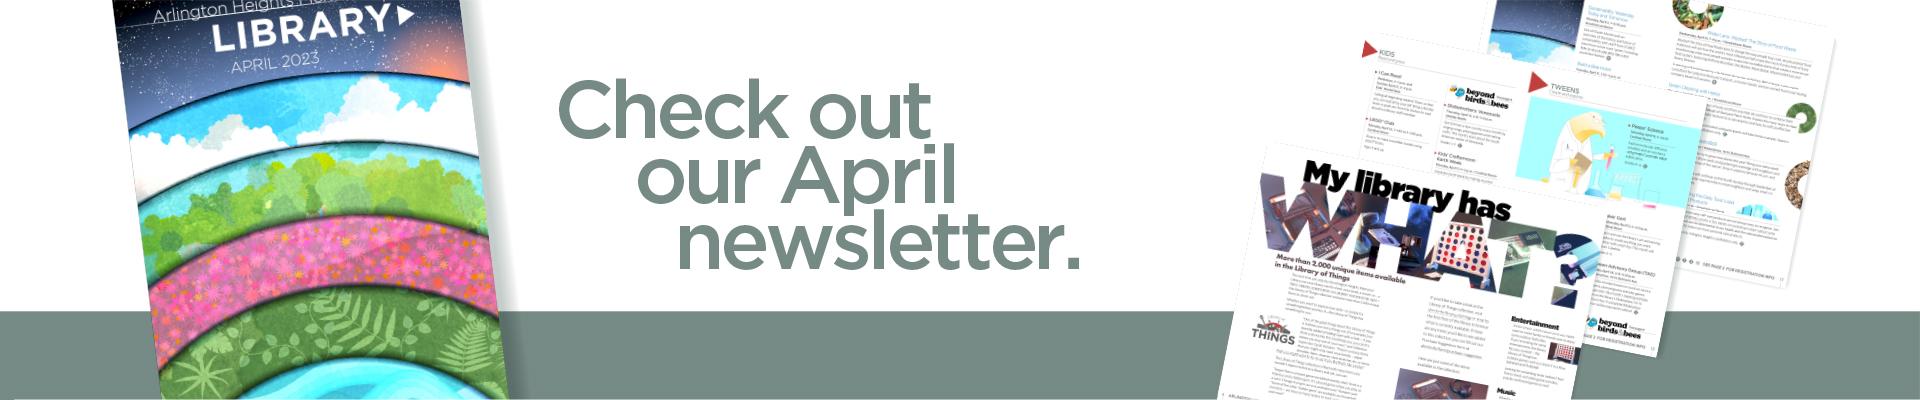 Check out our April newsletter